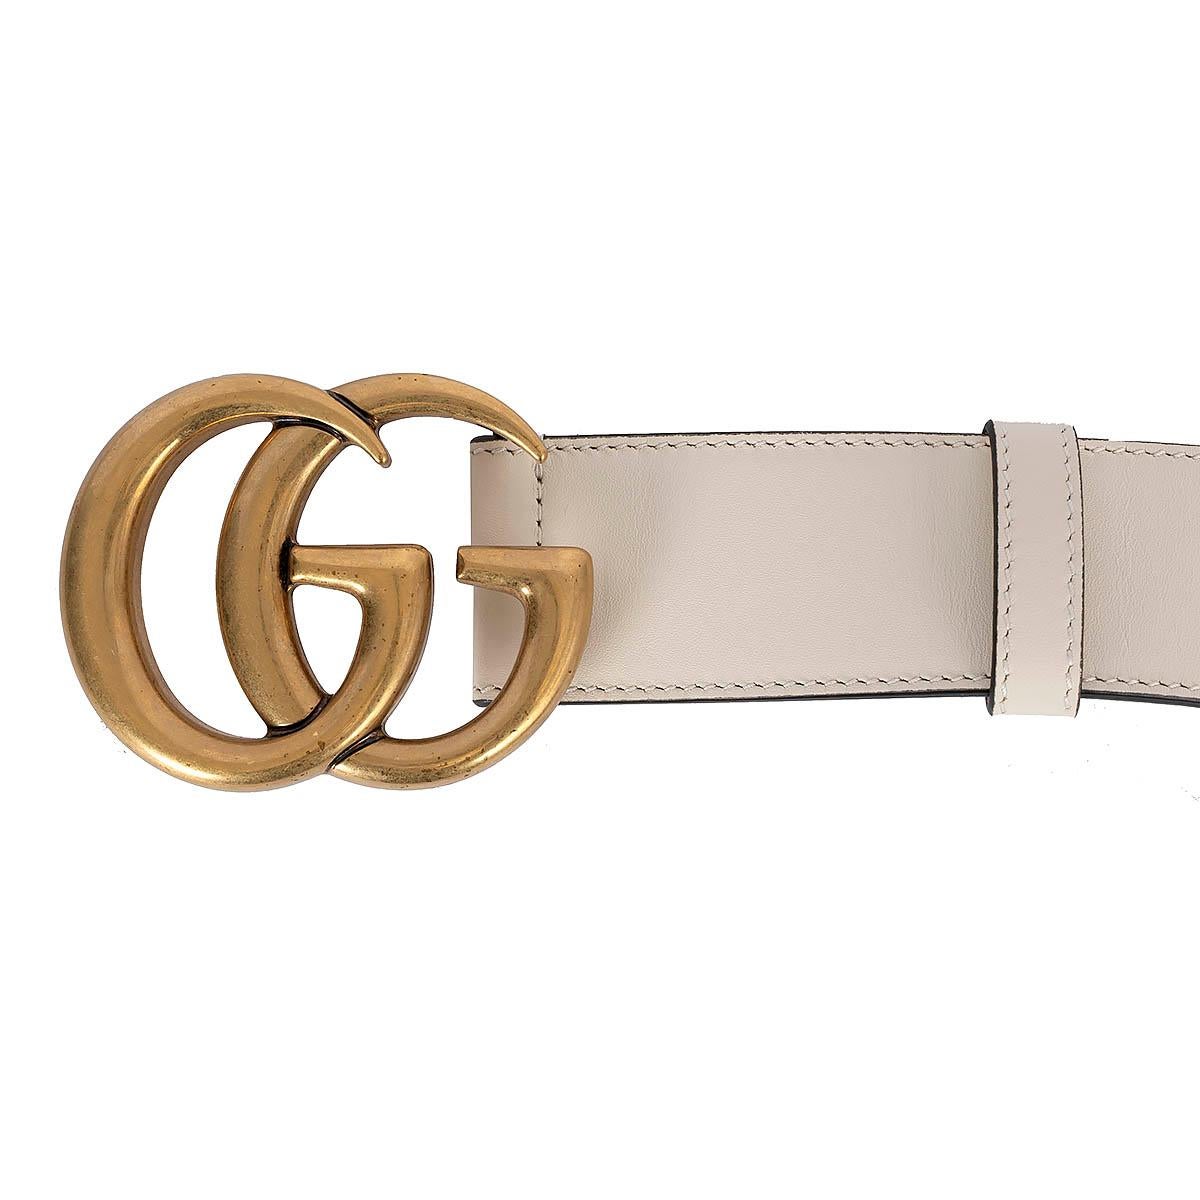 GUCCI cream leather GG MARMONT Belt 85 For Sale 2